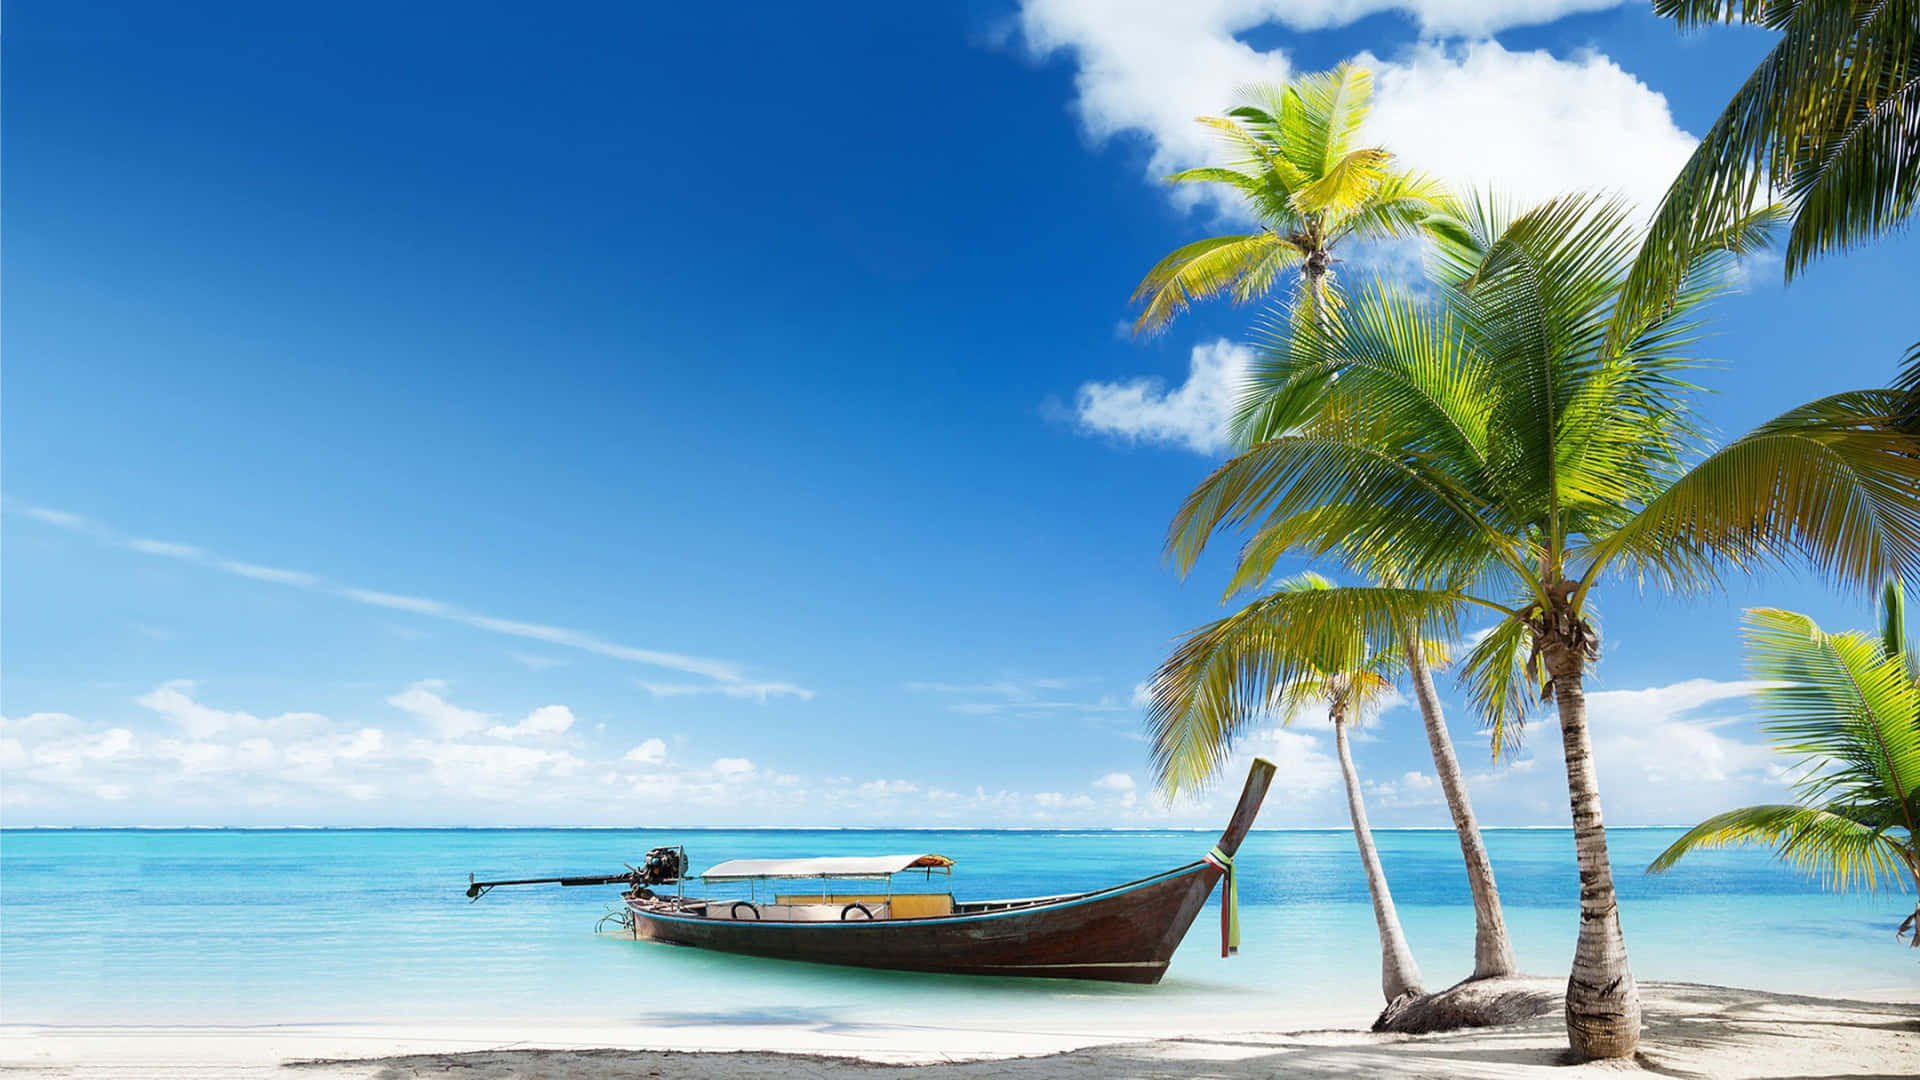 Relax at a peaceful beach in the Caribbean Wallpaper